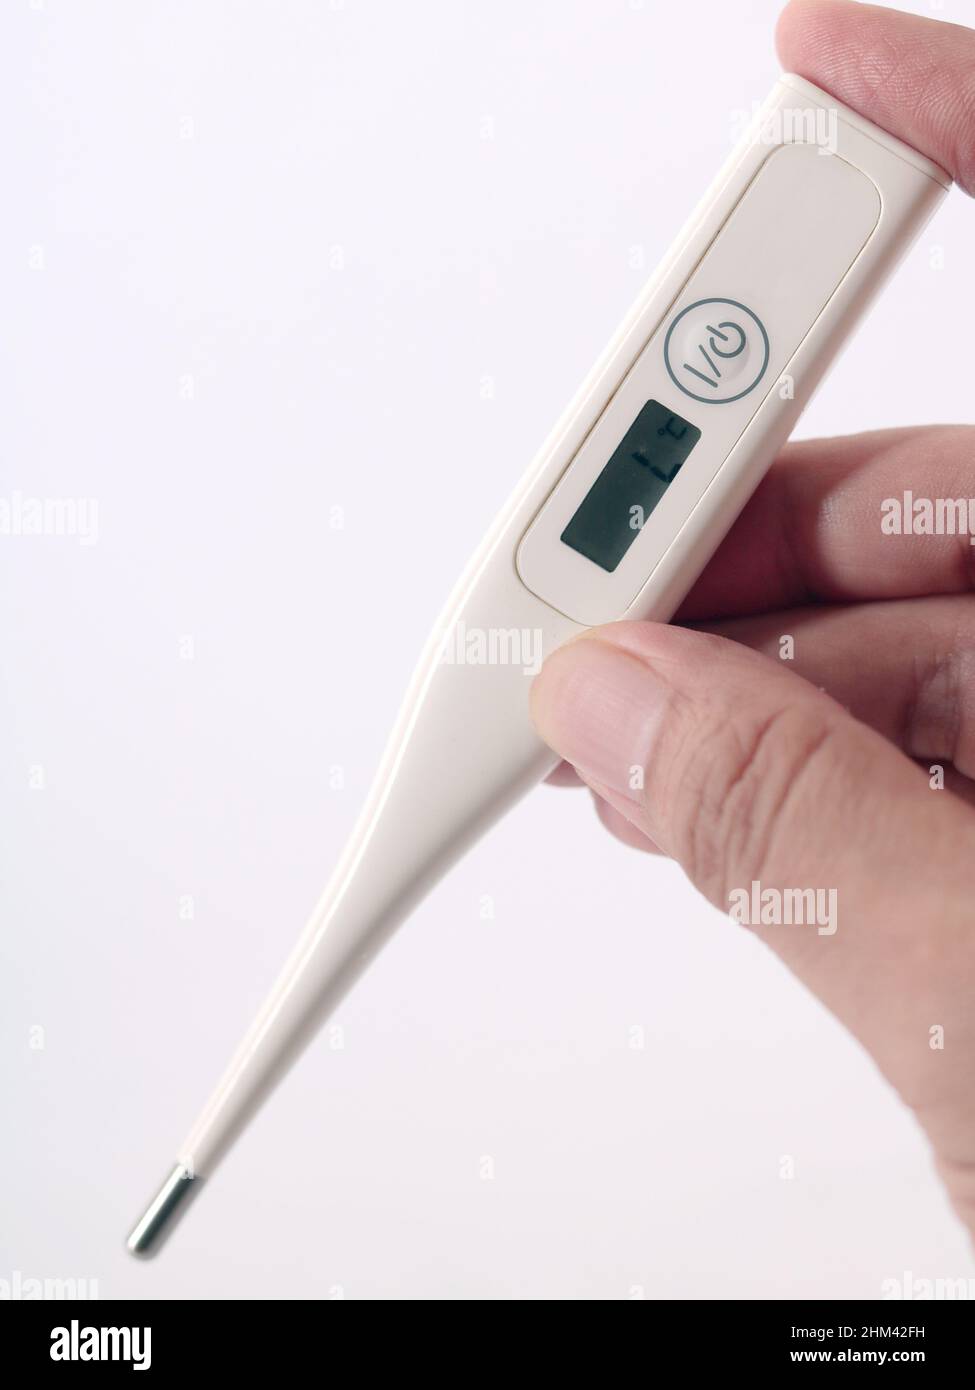 Termometer Thermometer